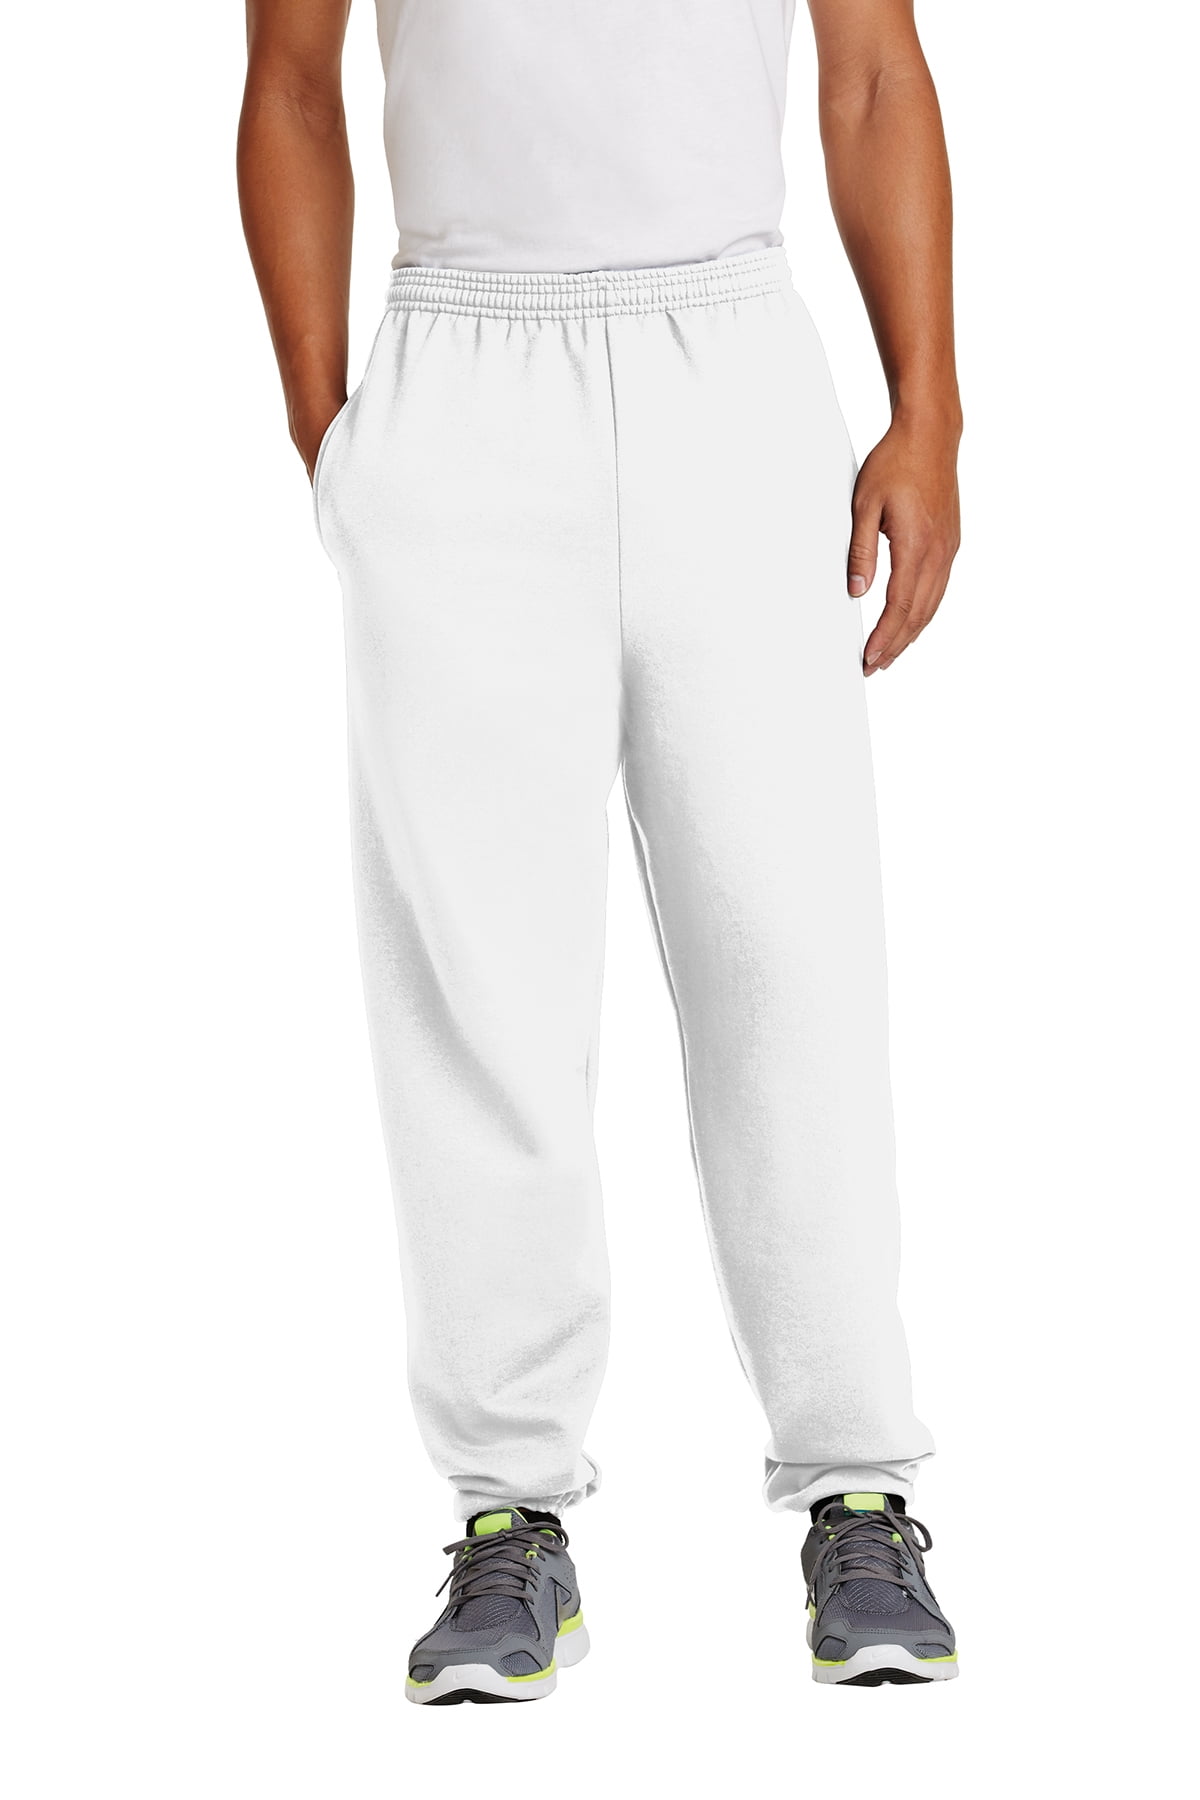 Men's Fashion Joggers - Pocketed Jogger Sweatpants - Relaxed-fit sweatpants  - Sportswear bottoms - Best for Gym Exercise Outdoor Hiking Yoga Lounge  pants Casual joggers Radyan's Workout pants. 9 OZ 